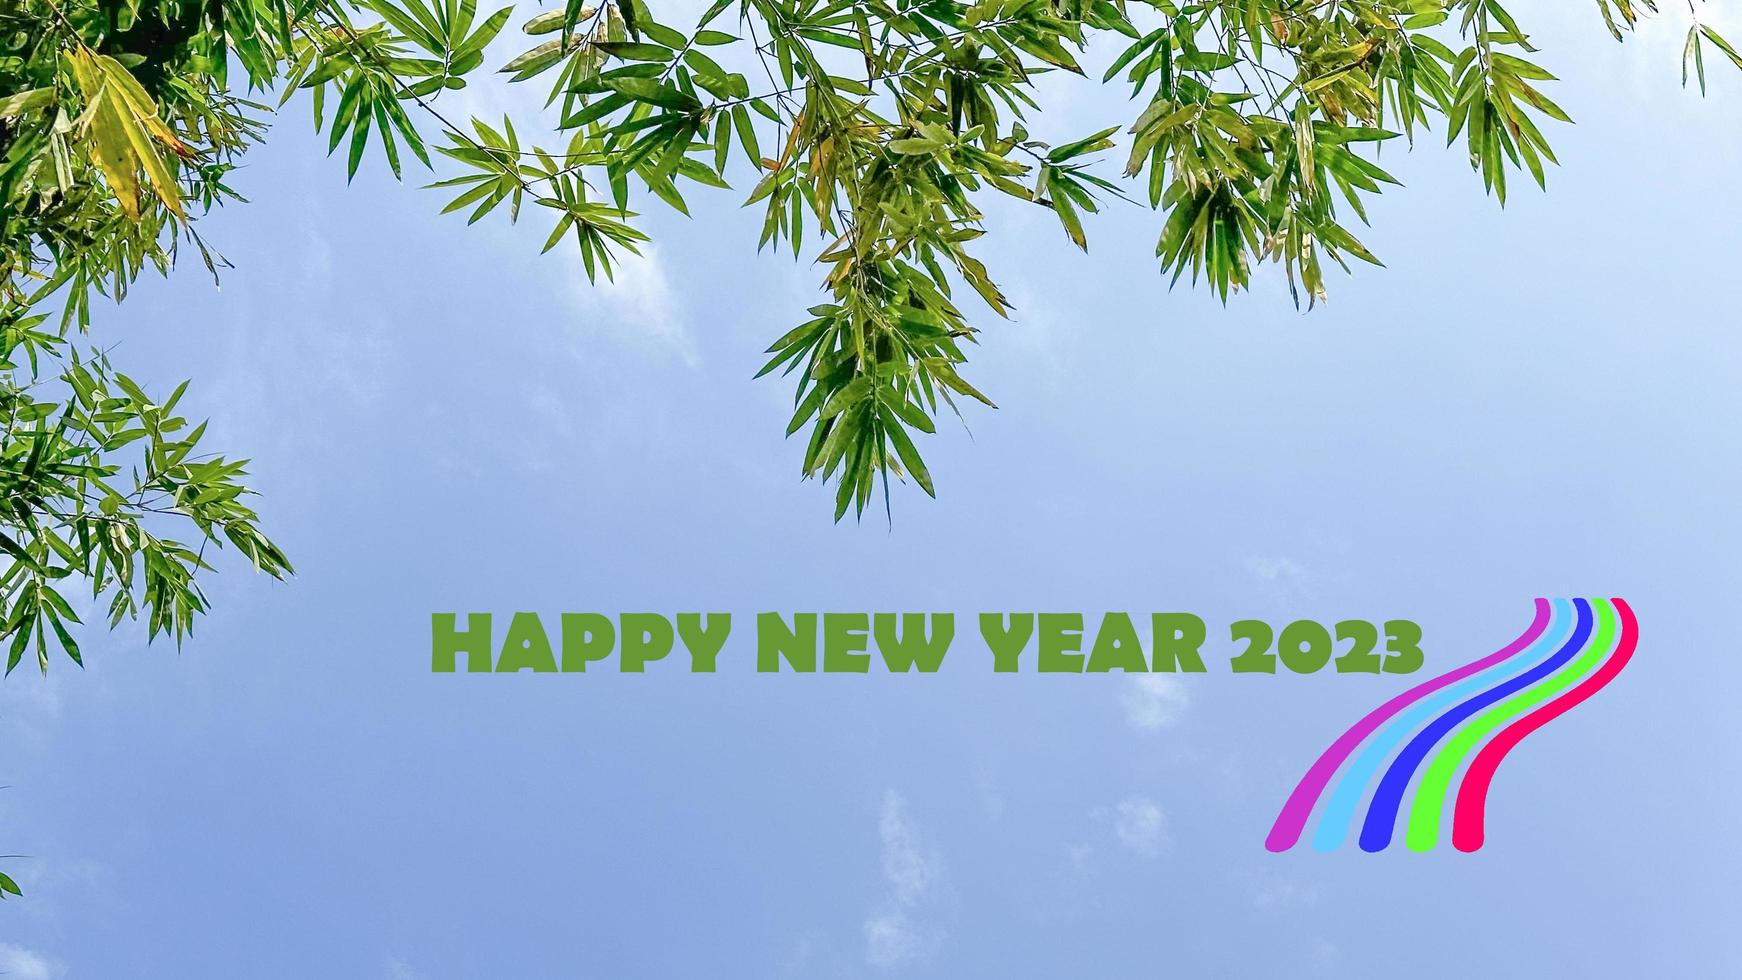 Tree leaves on blue sky background with text happy new year 2023 and graphic of small lines of colors photo